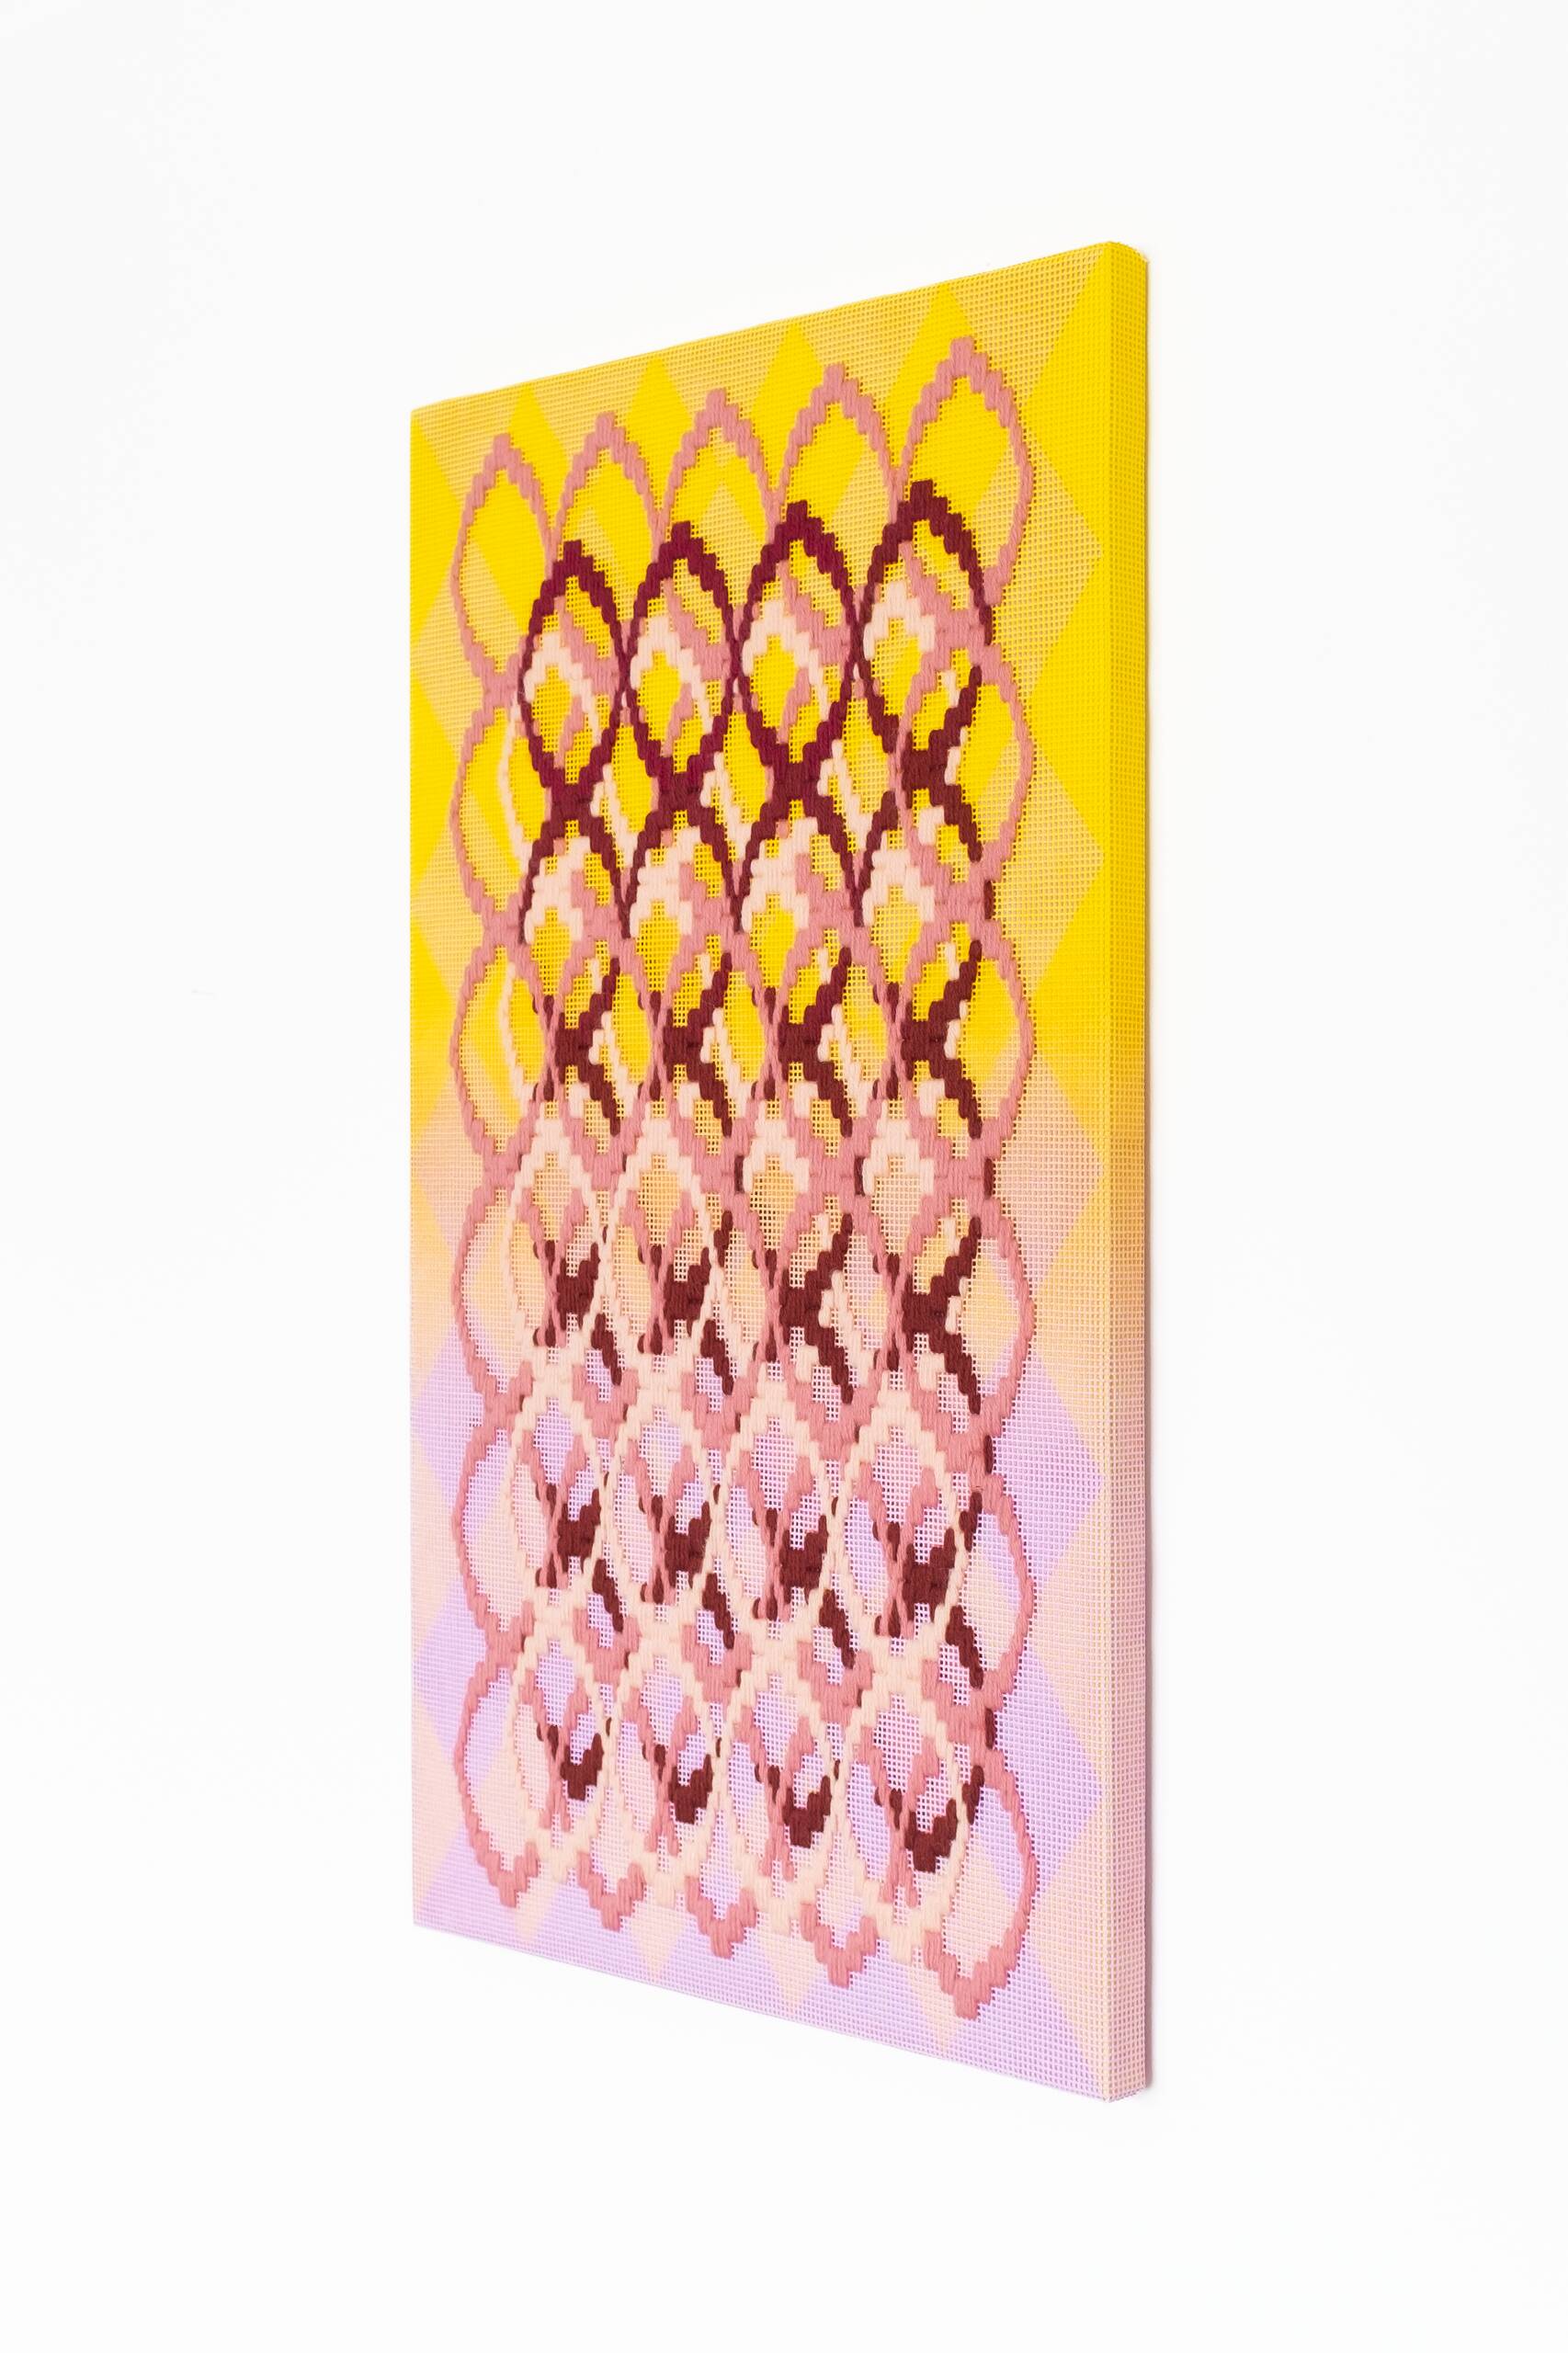 Pattern analysis [Golden Ratio, yellow and fuchsia], Hand-embroidered wool yarn and acrylic paint on canvas over painted and gilded panel, 2022